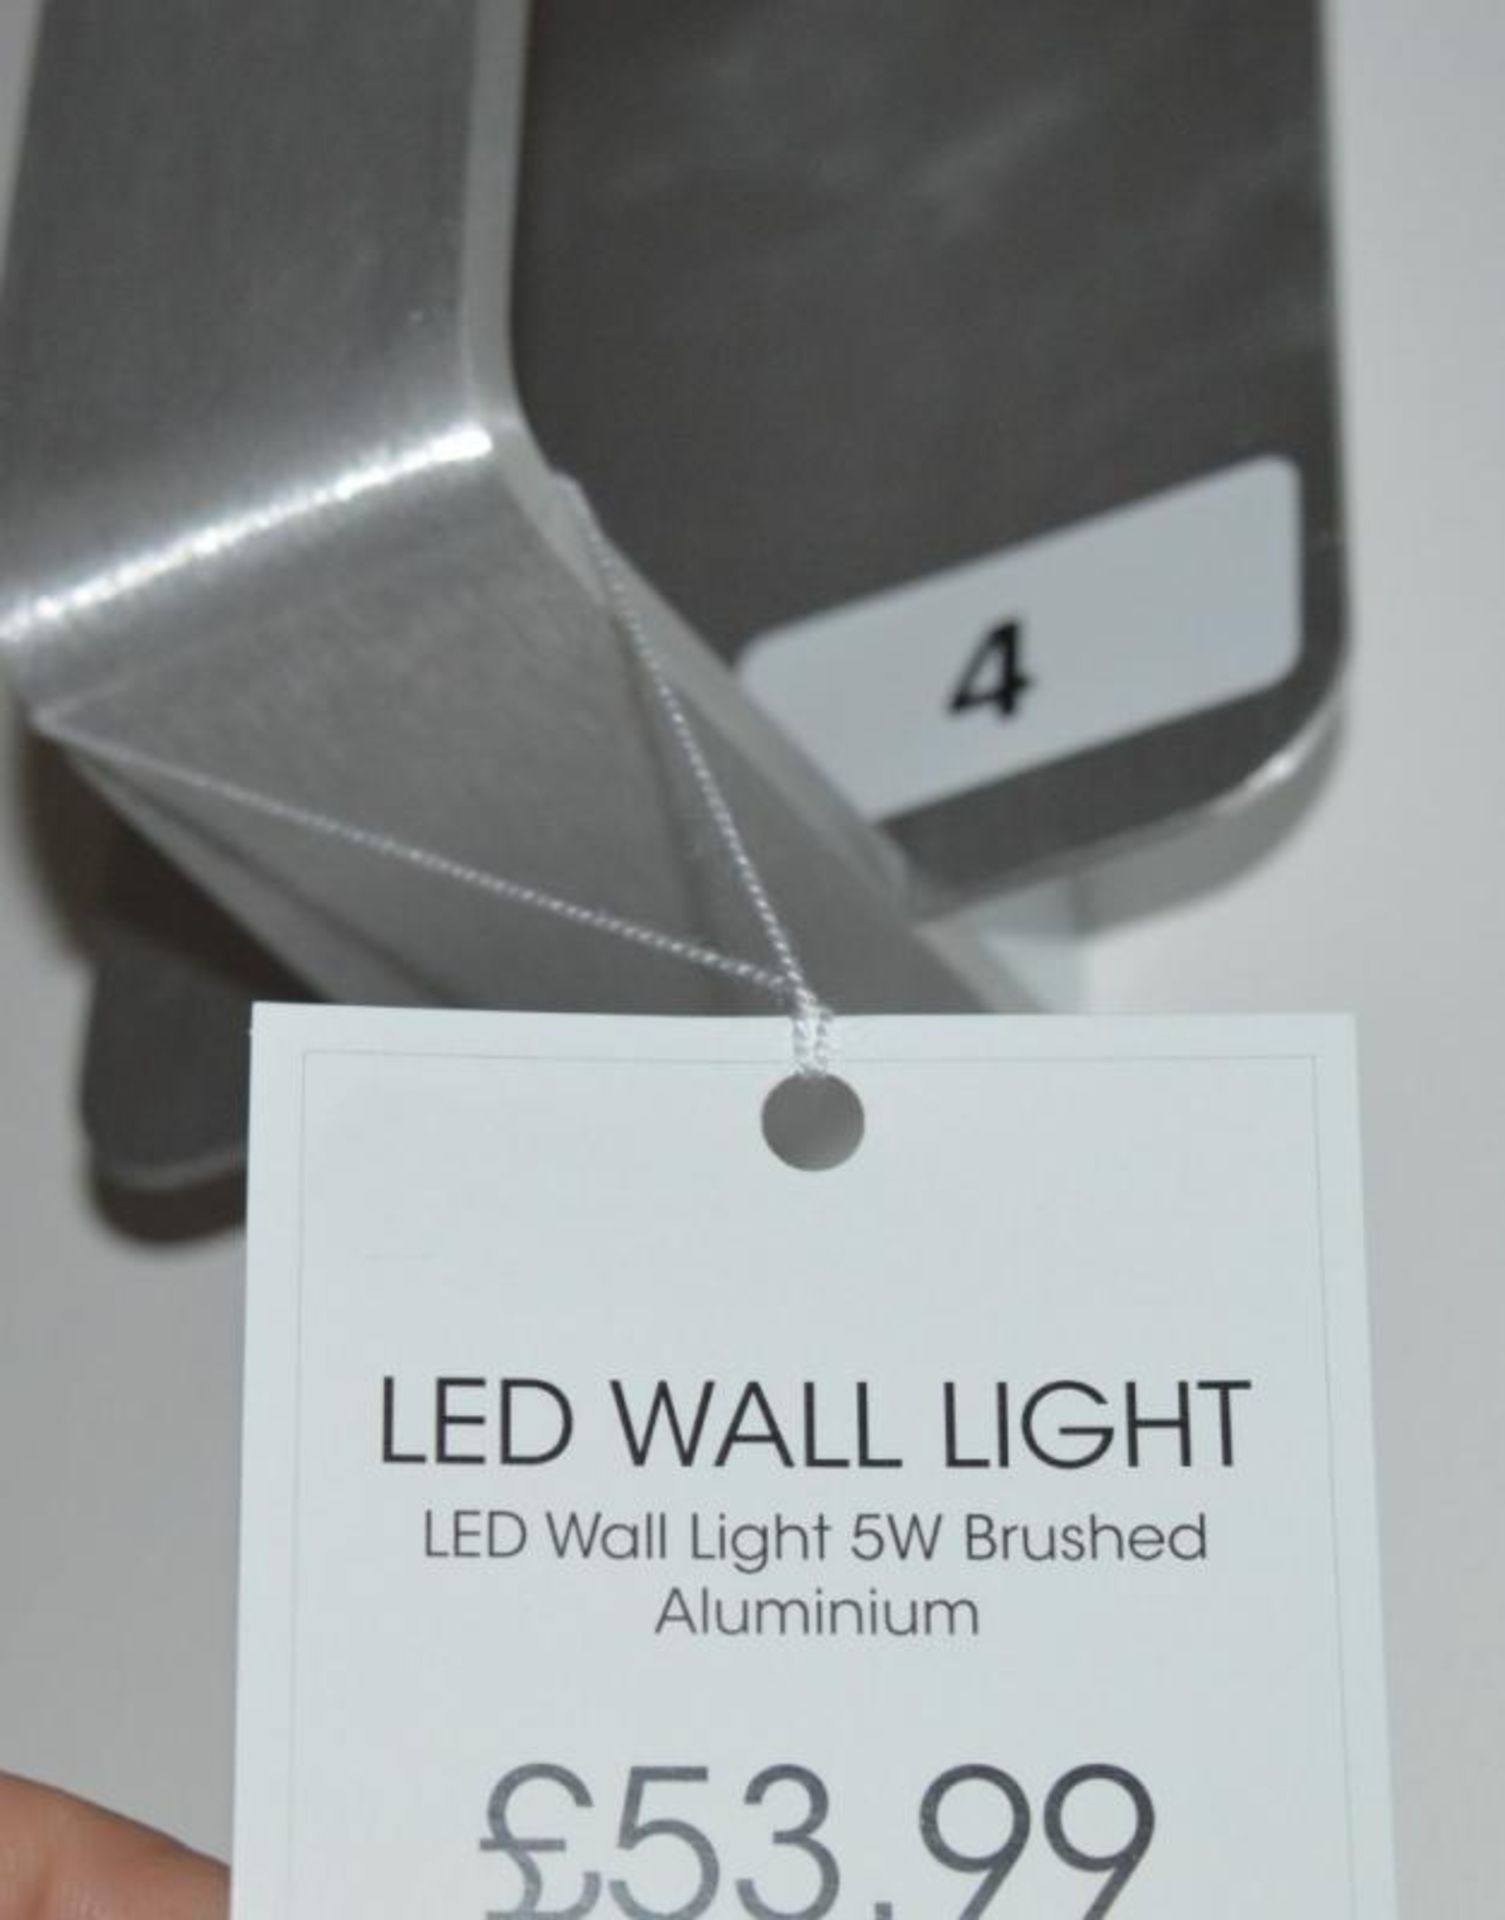 1 x Brushed Aluminium LED 5w Wall Light - Contemporary Design - Ex Display Stock - CL298 - Ref 4 - L - Image 2 of 3